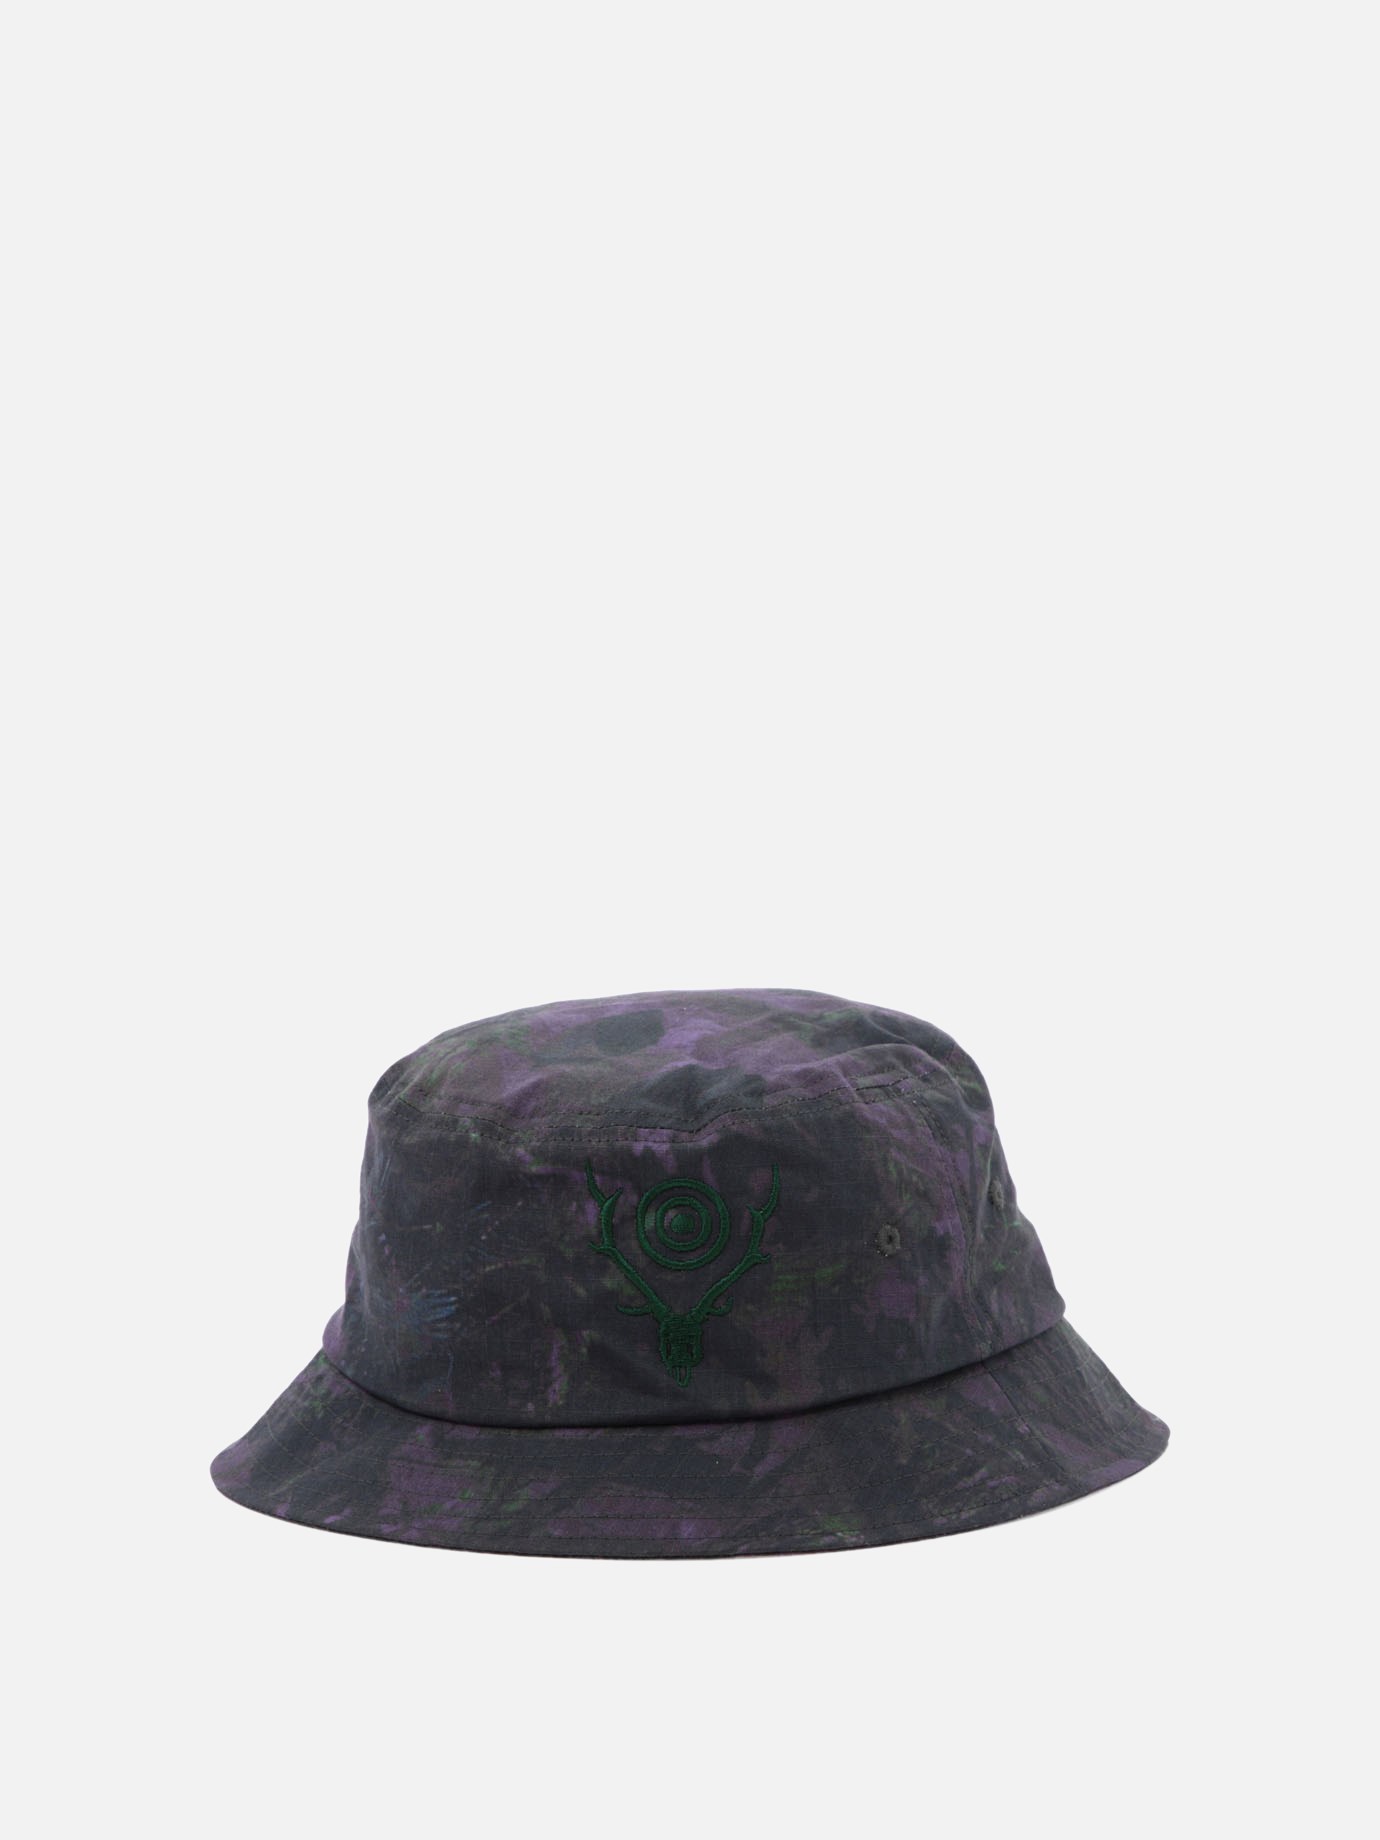 Bucket hat with embroideryby South2 West8 - 2